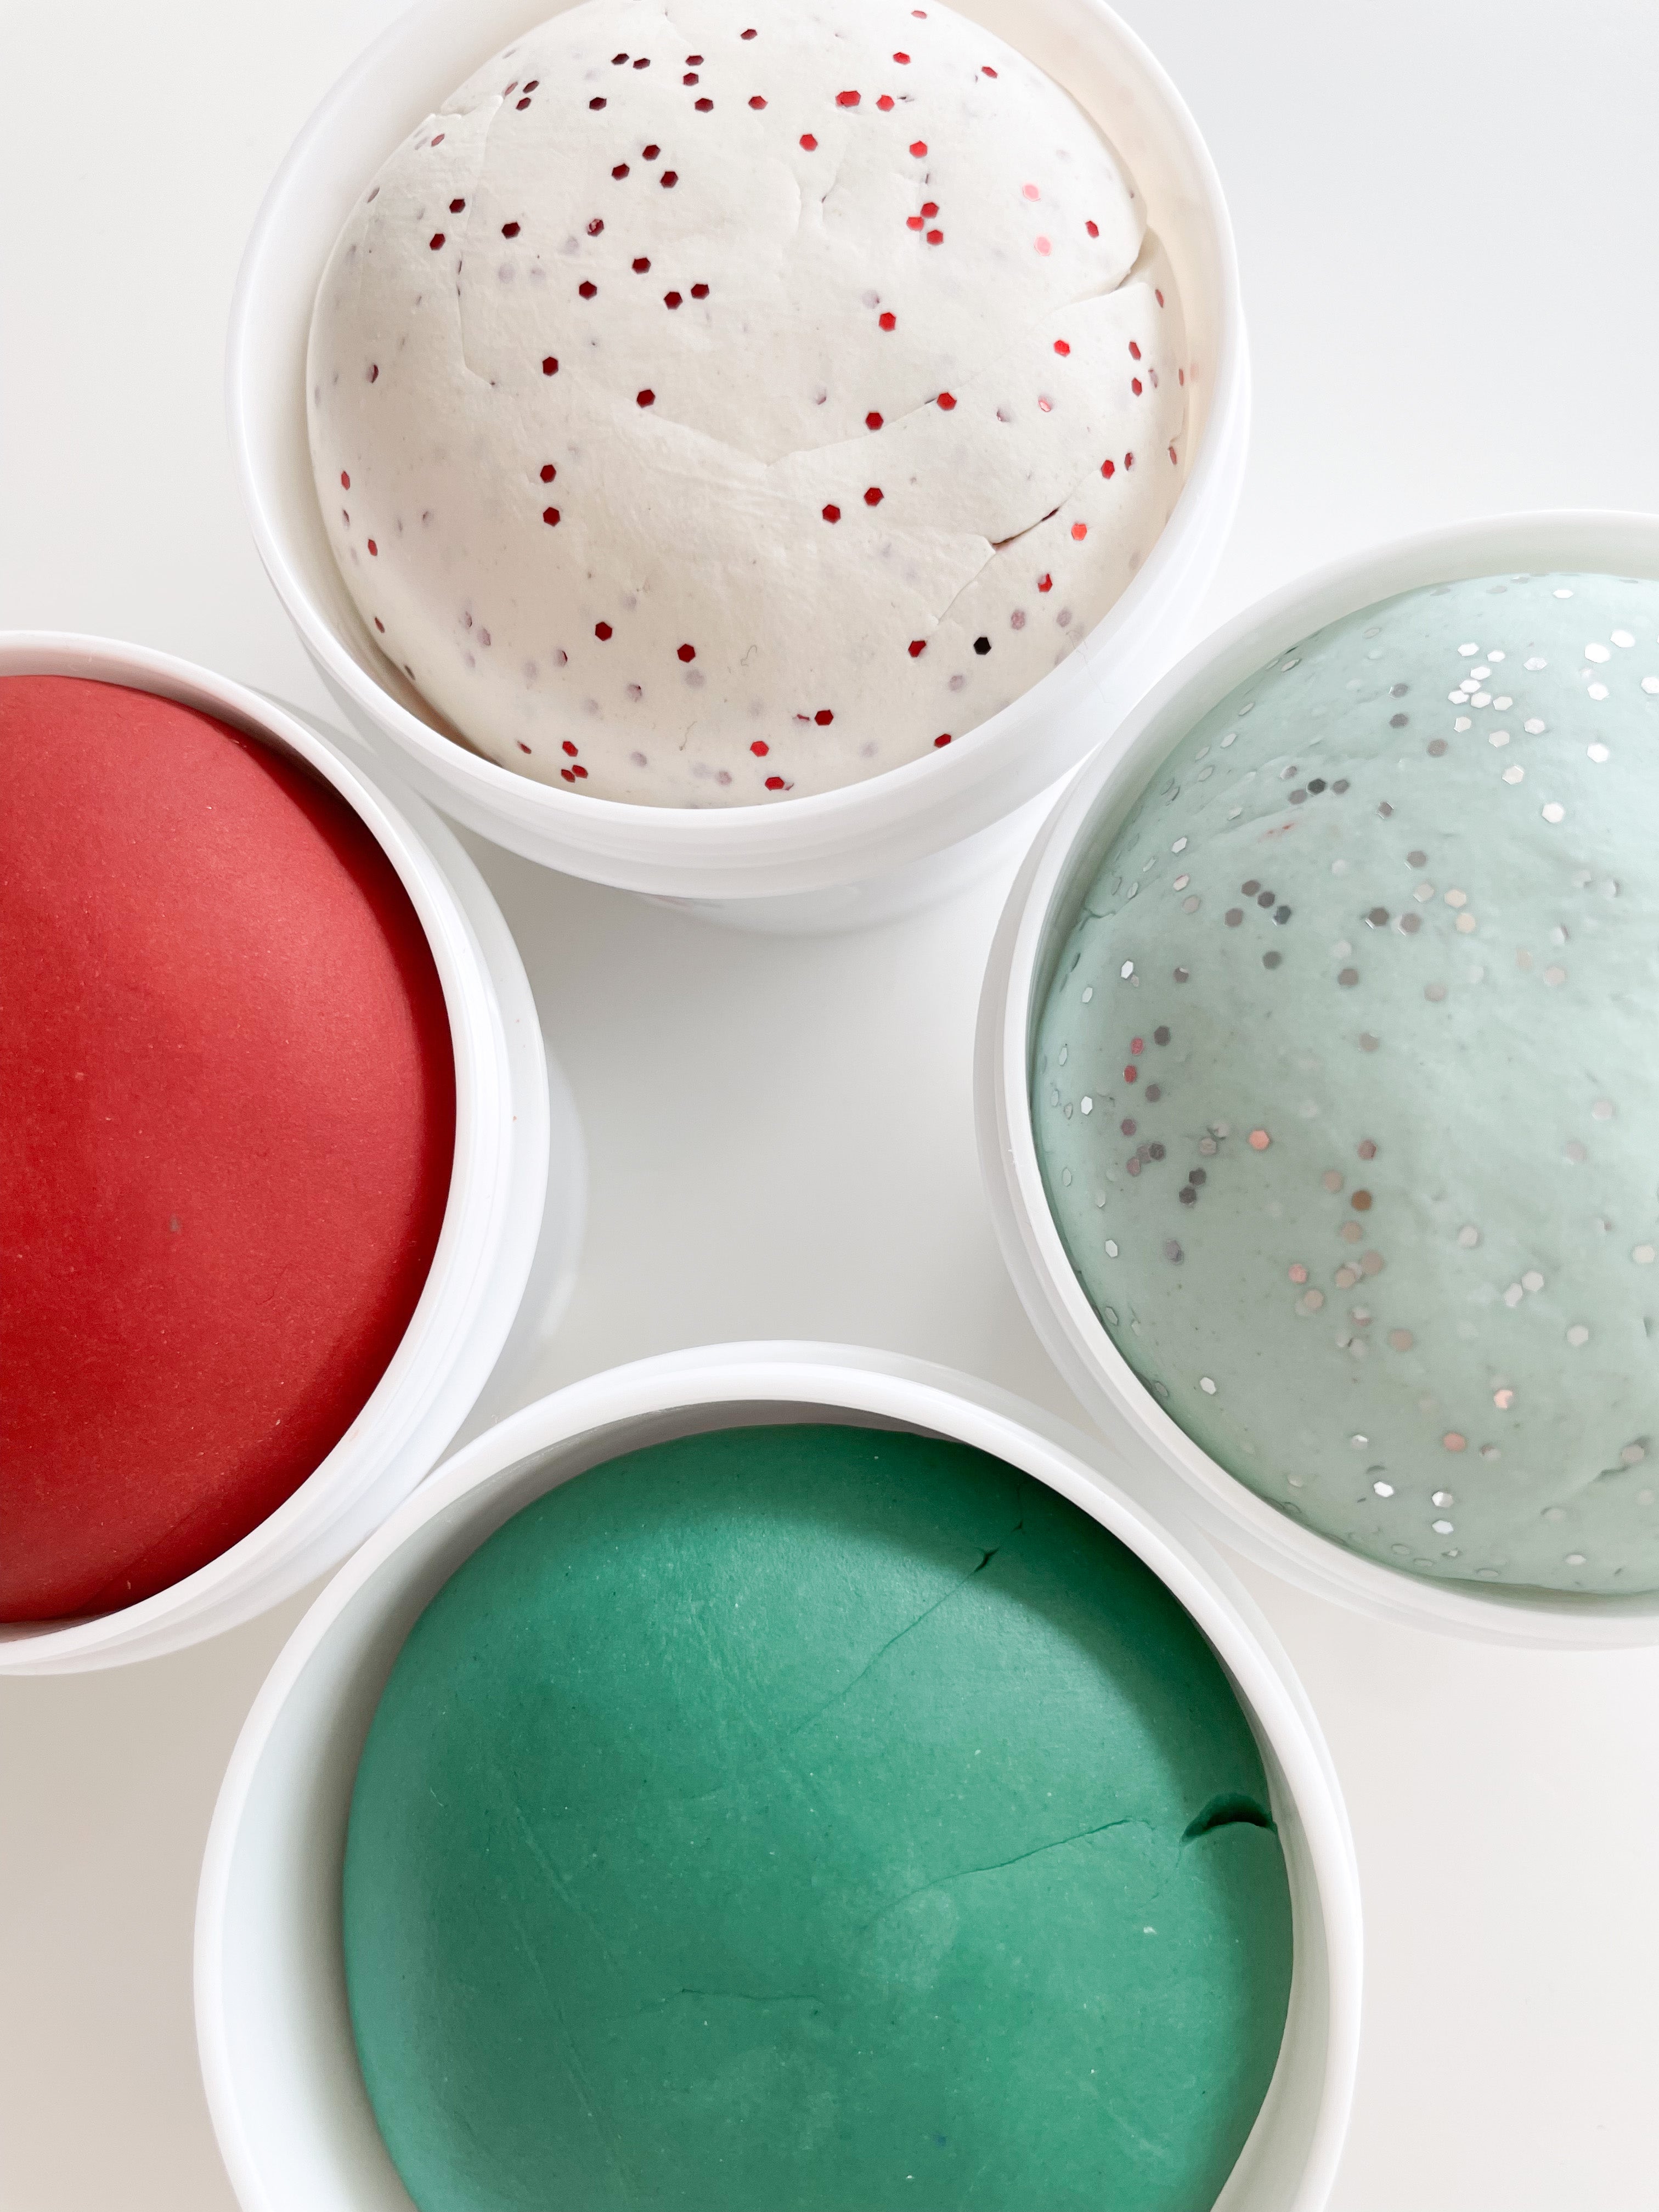 Scoops Candy Cane Play Dough